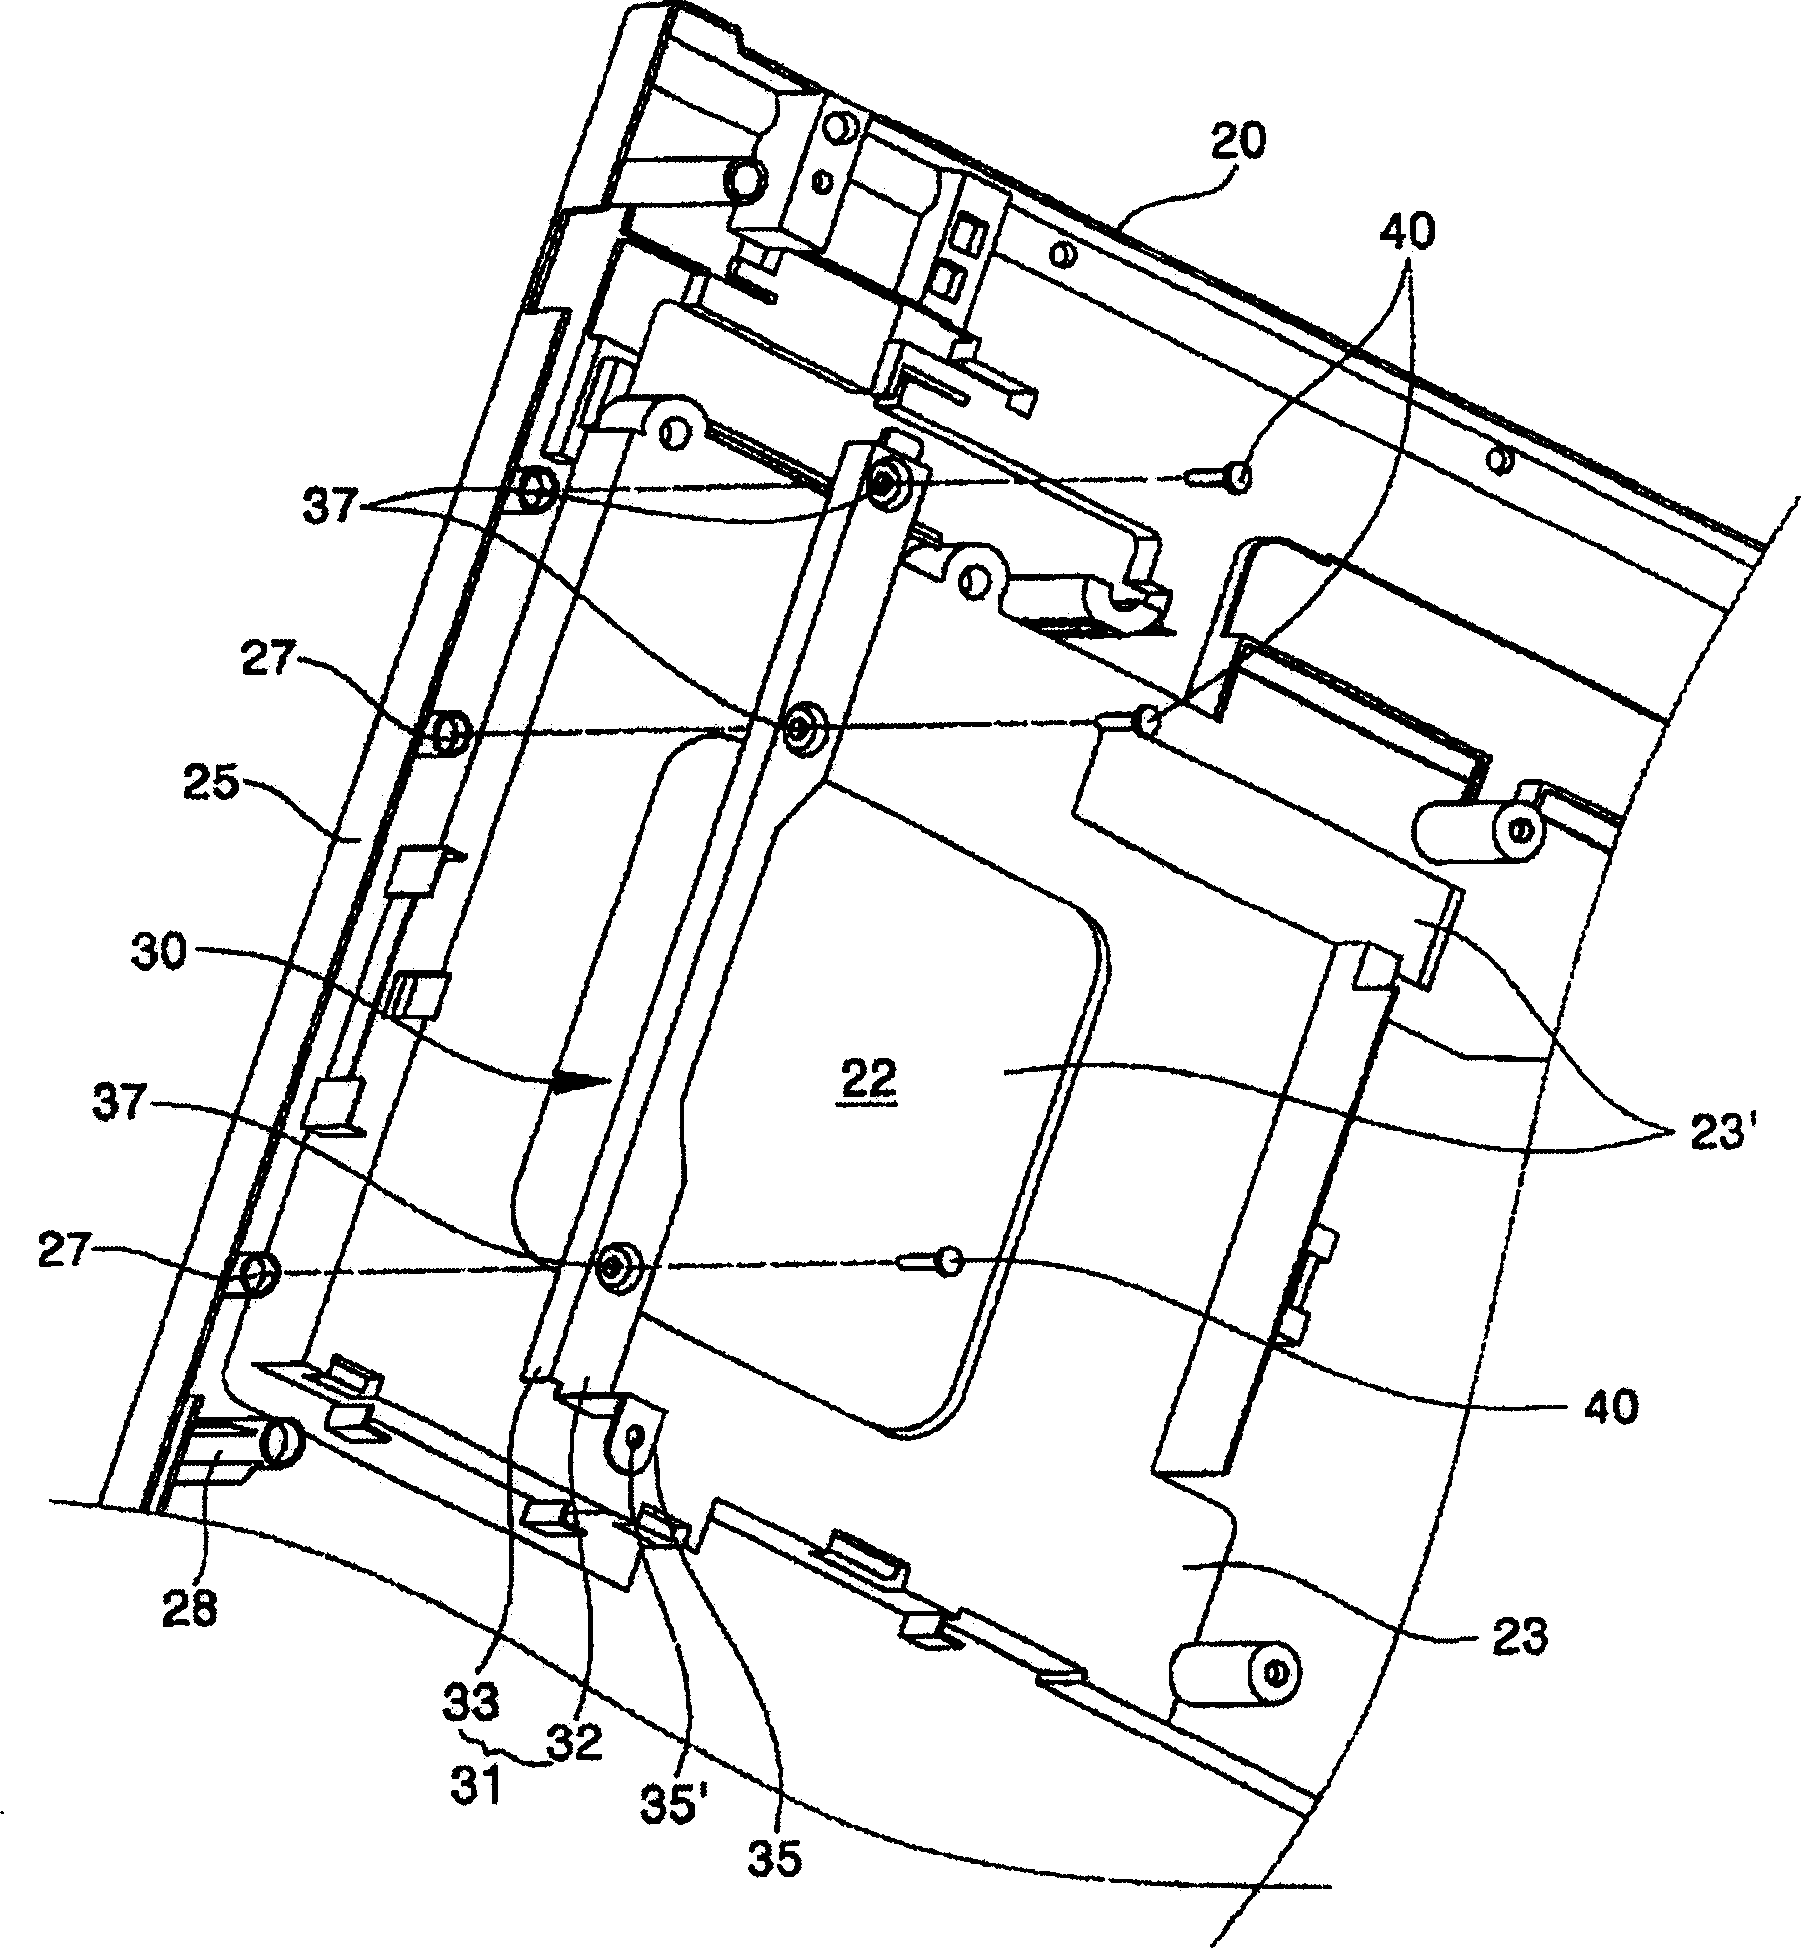 Enhaucement structure for support mechanism of keyboard of note-book computer